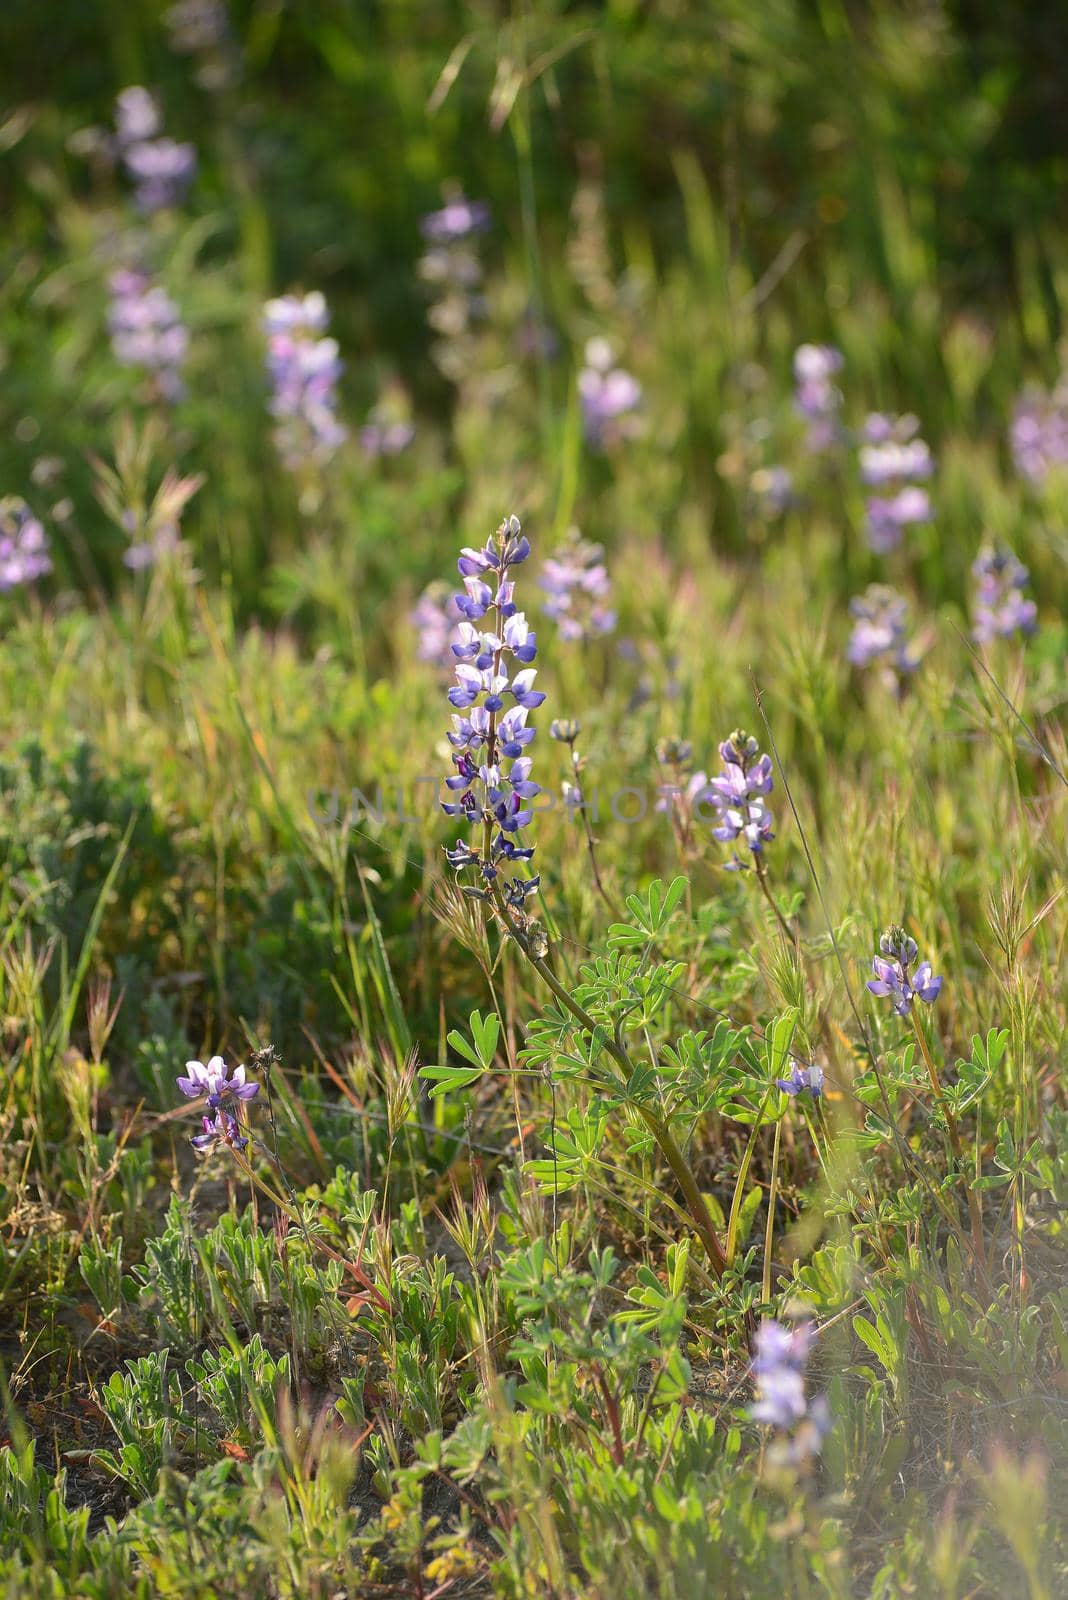 purple wild lupine flower with late afternoon light